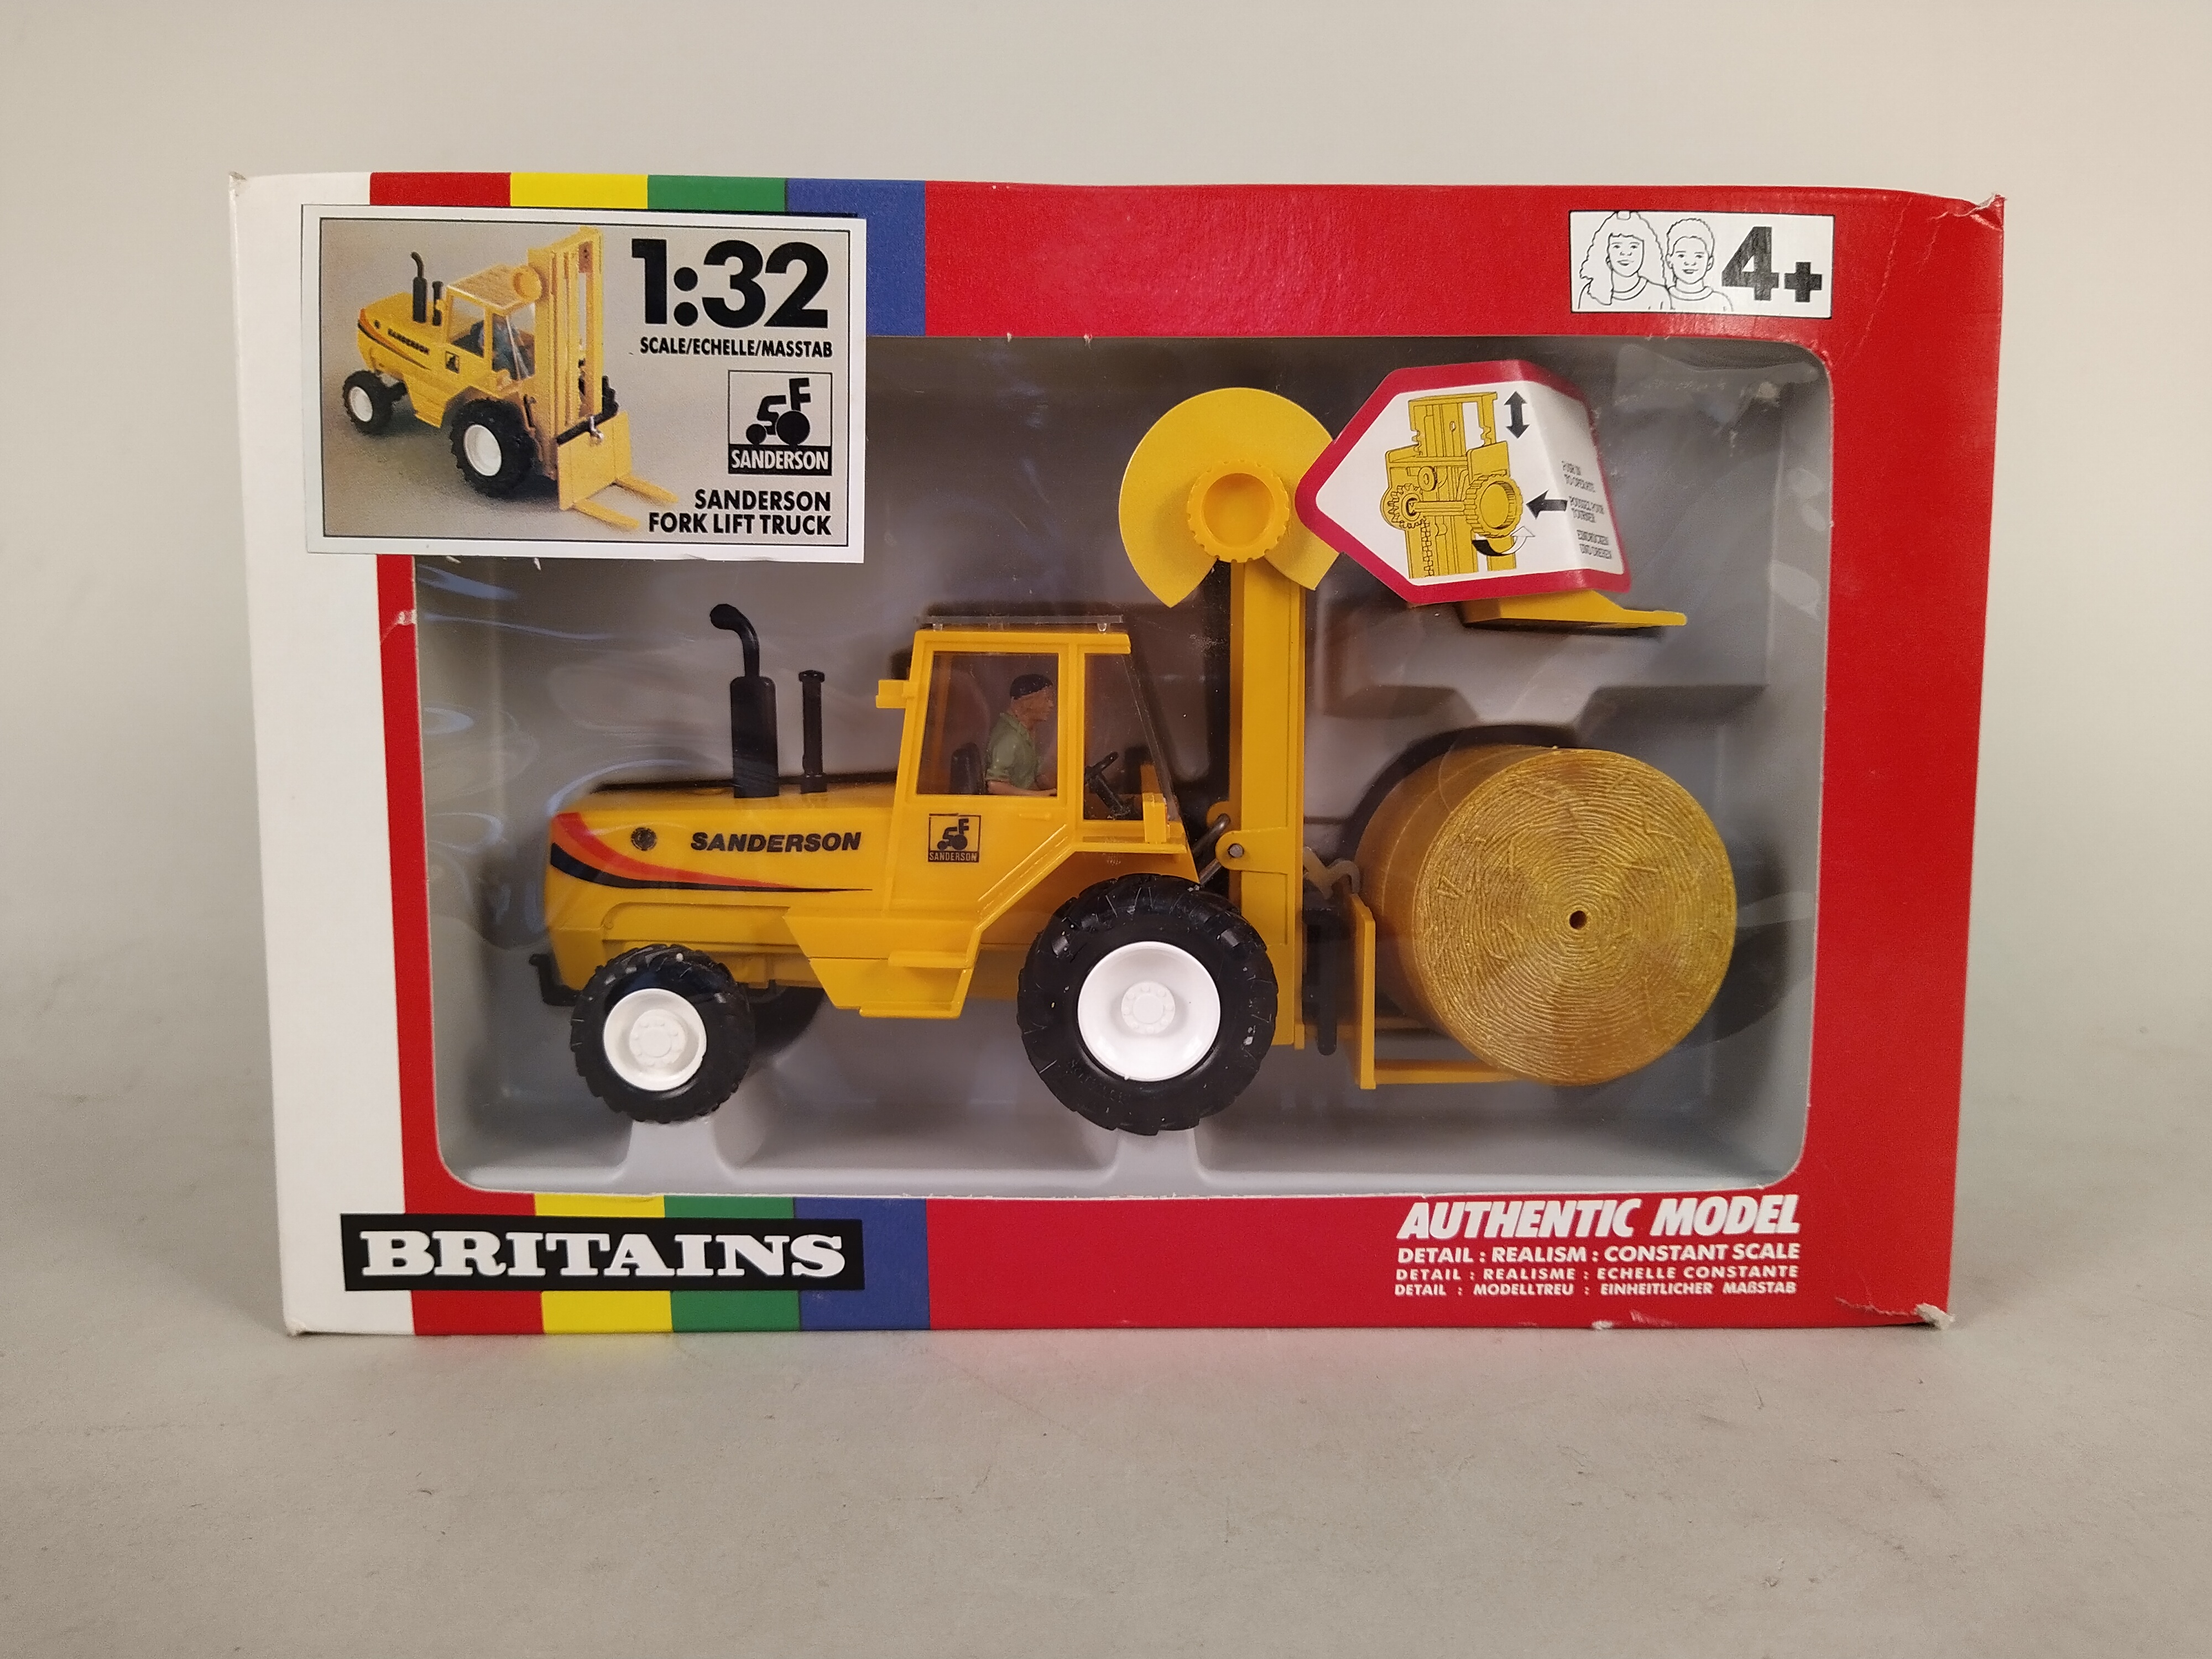 Three boxed Britains 1:32 scale models including 9500 Massey Ferguson, - Image 3 of 3